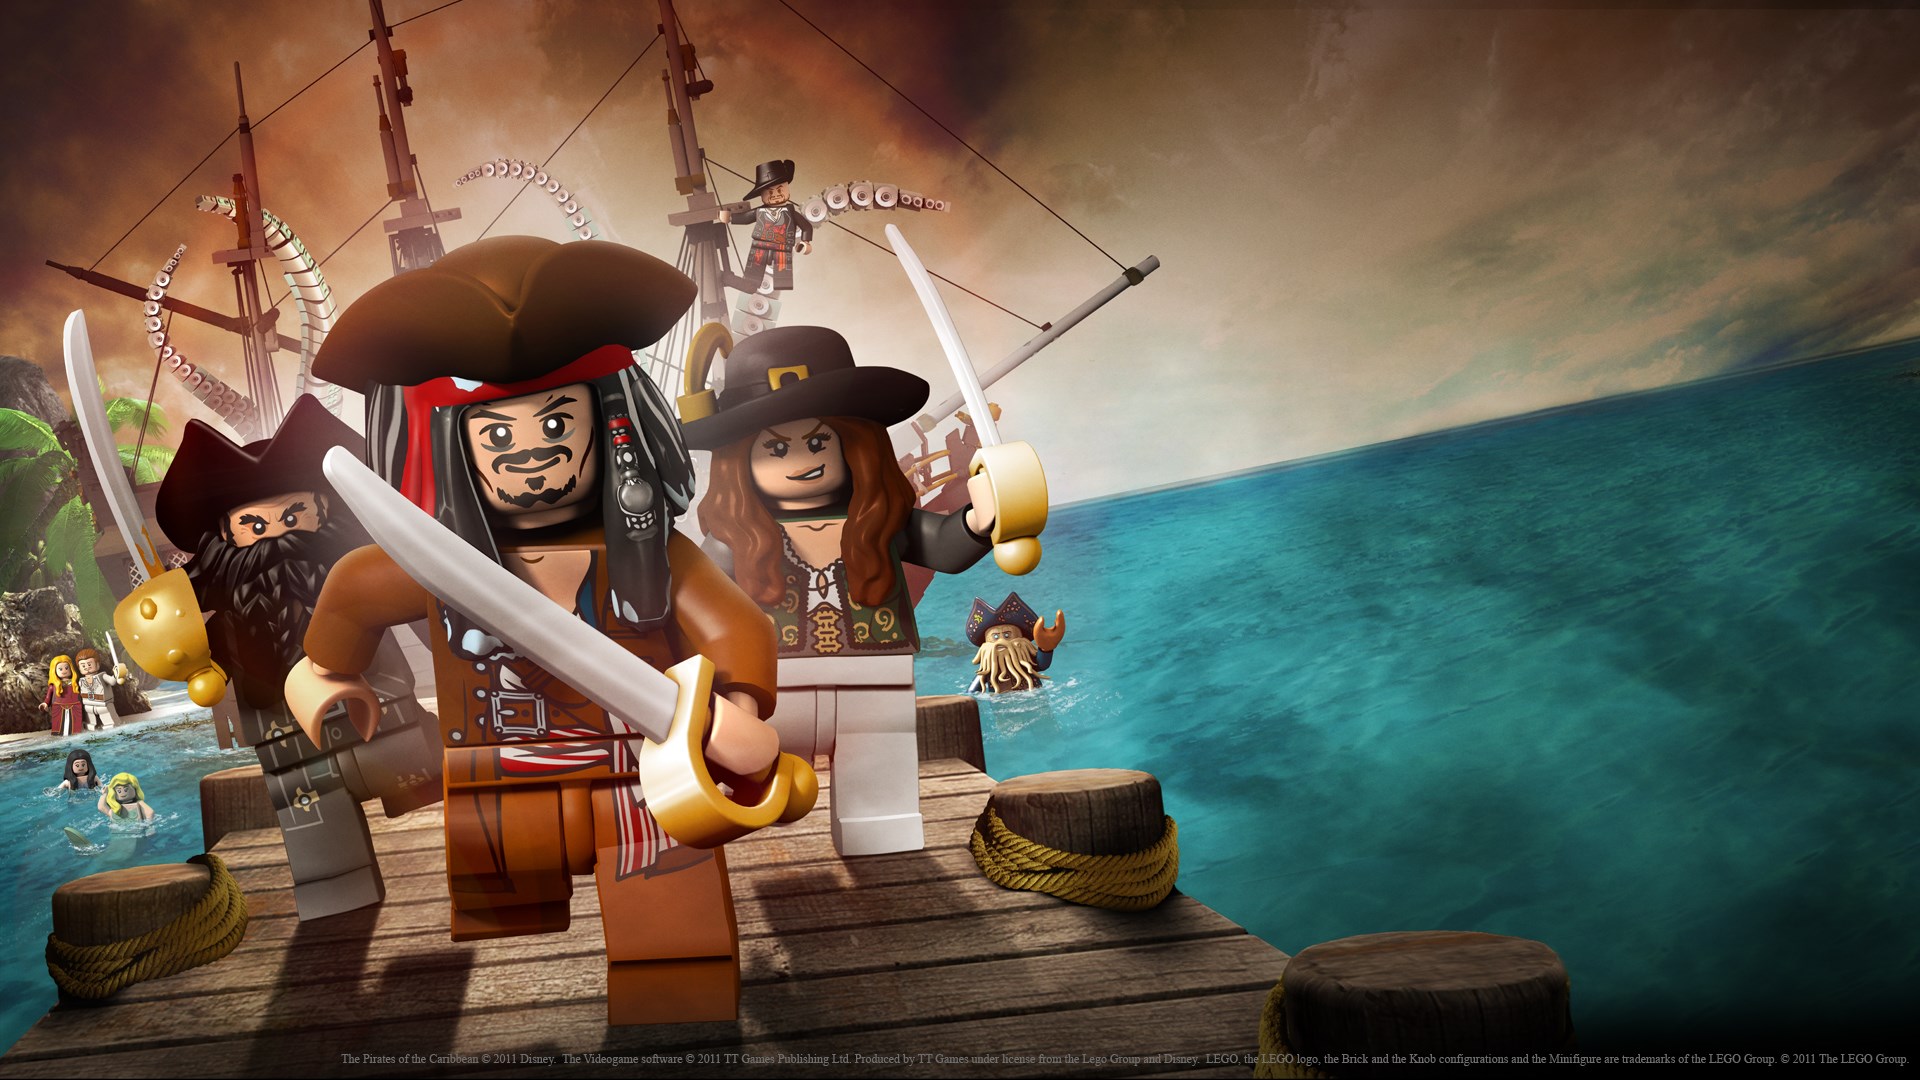 pirates of the caribbean lego game xbox one